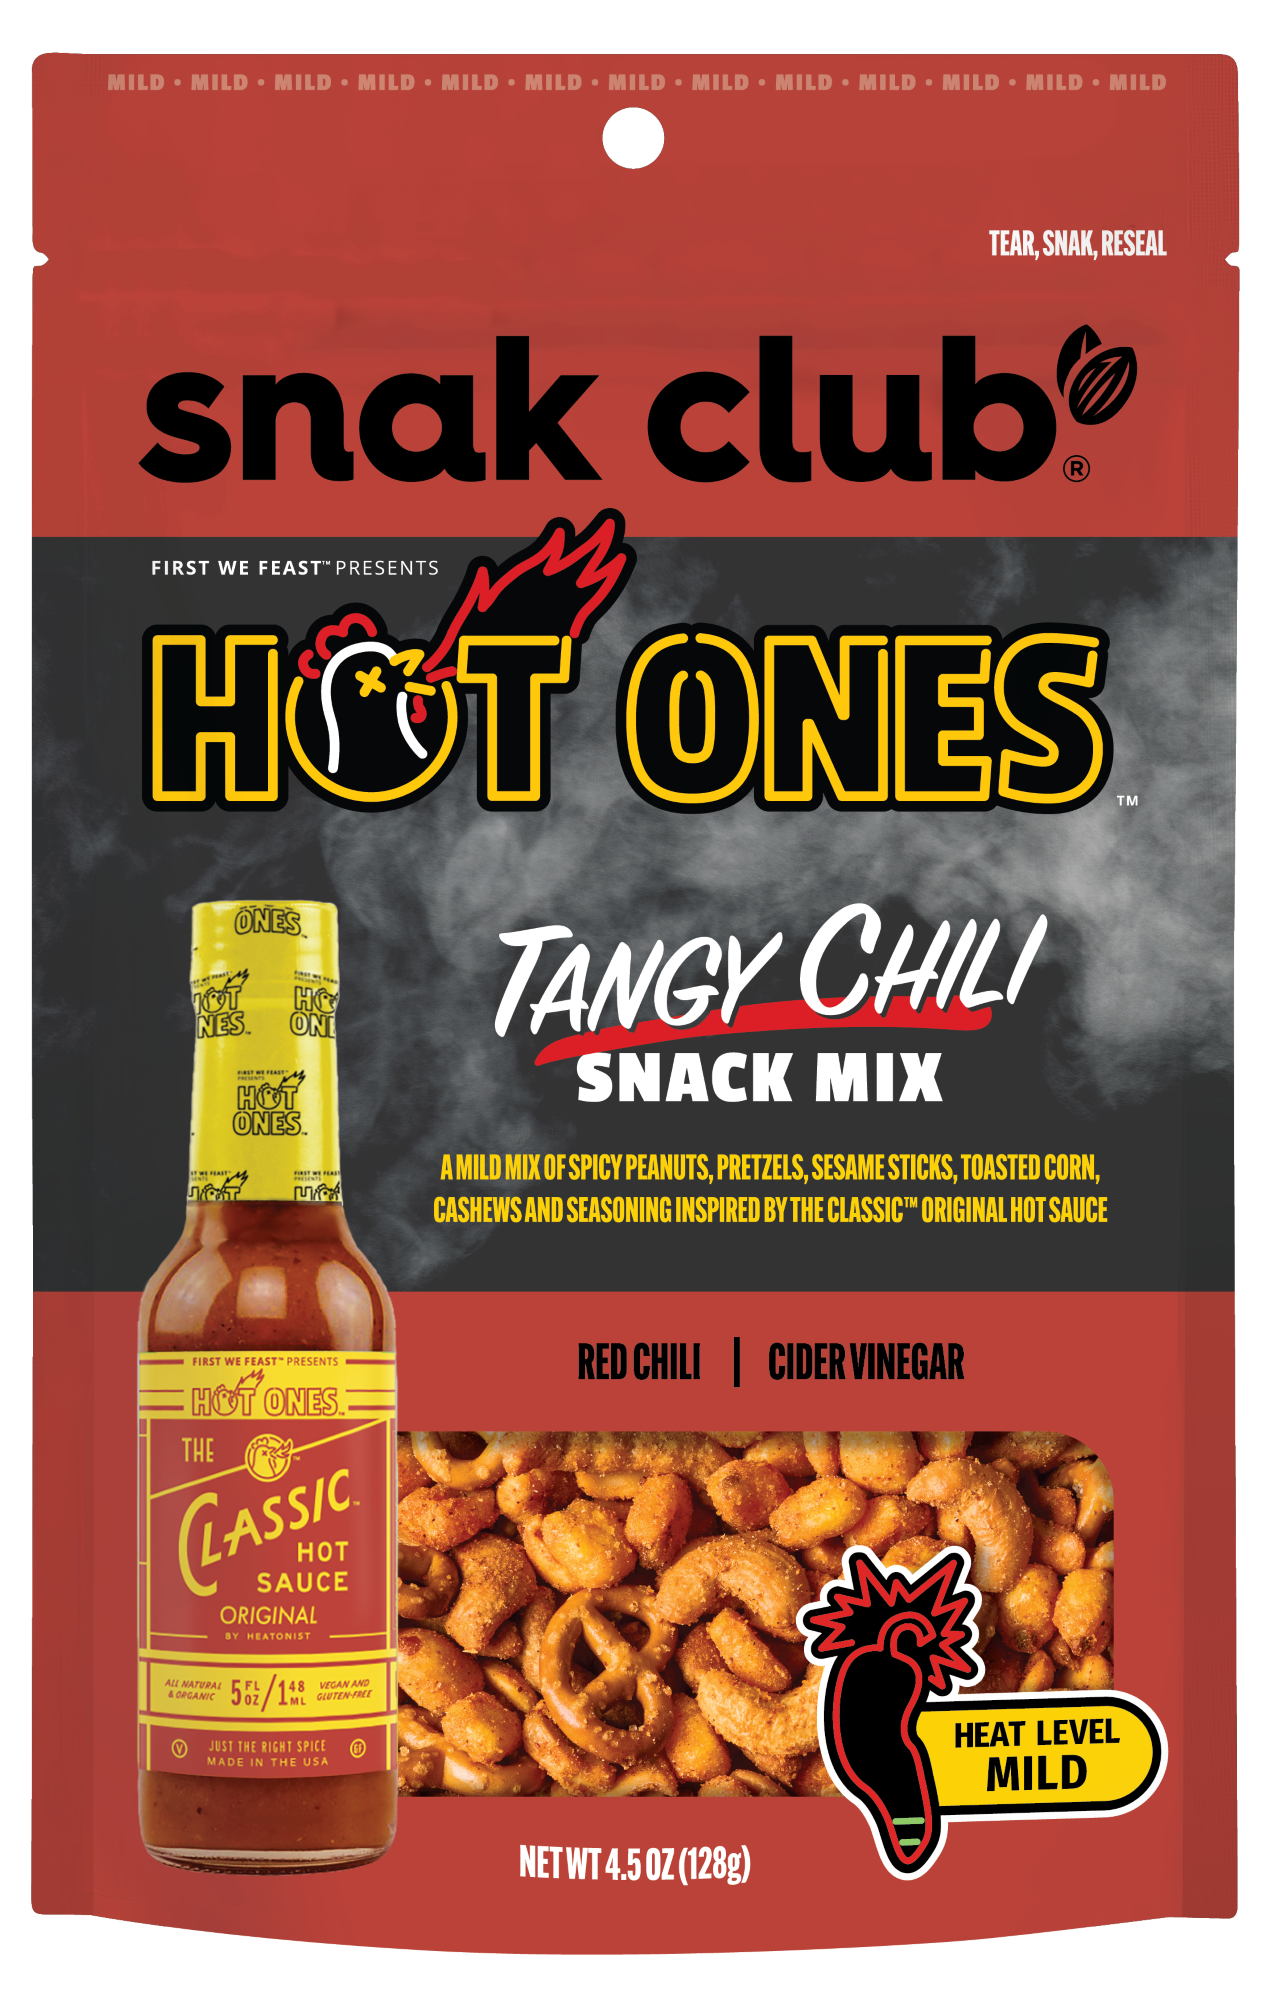 Snak club hot ones tangy chili 4.5oz